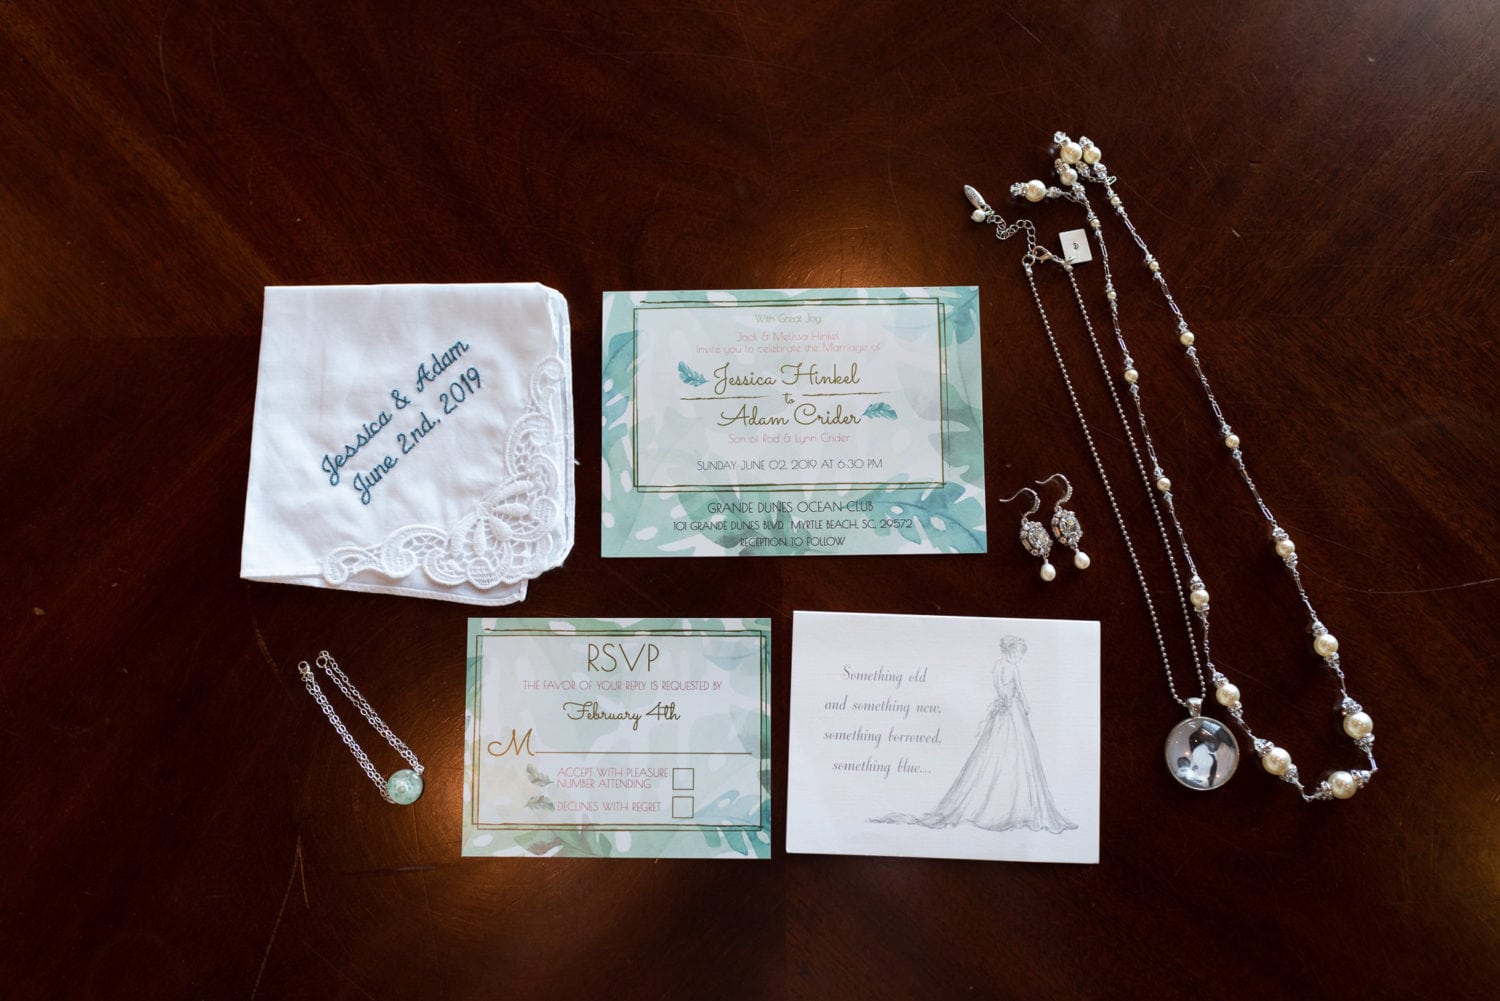 Details of jewelry and invitations - Grande Dunes Ocean Club - Myrtle Beach